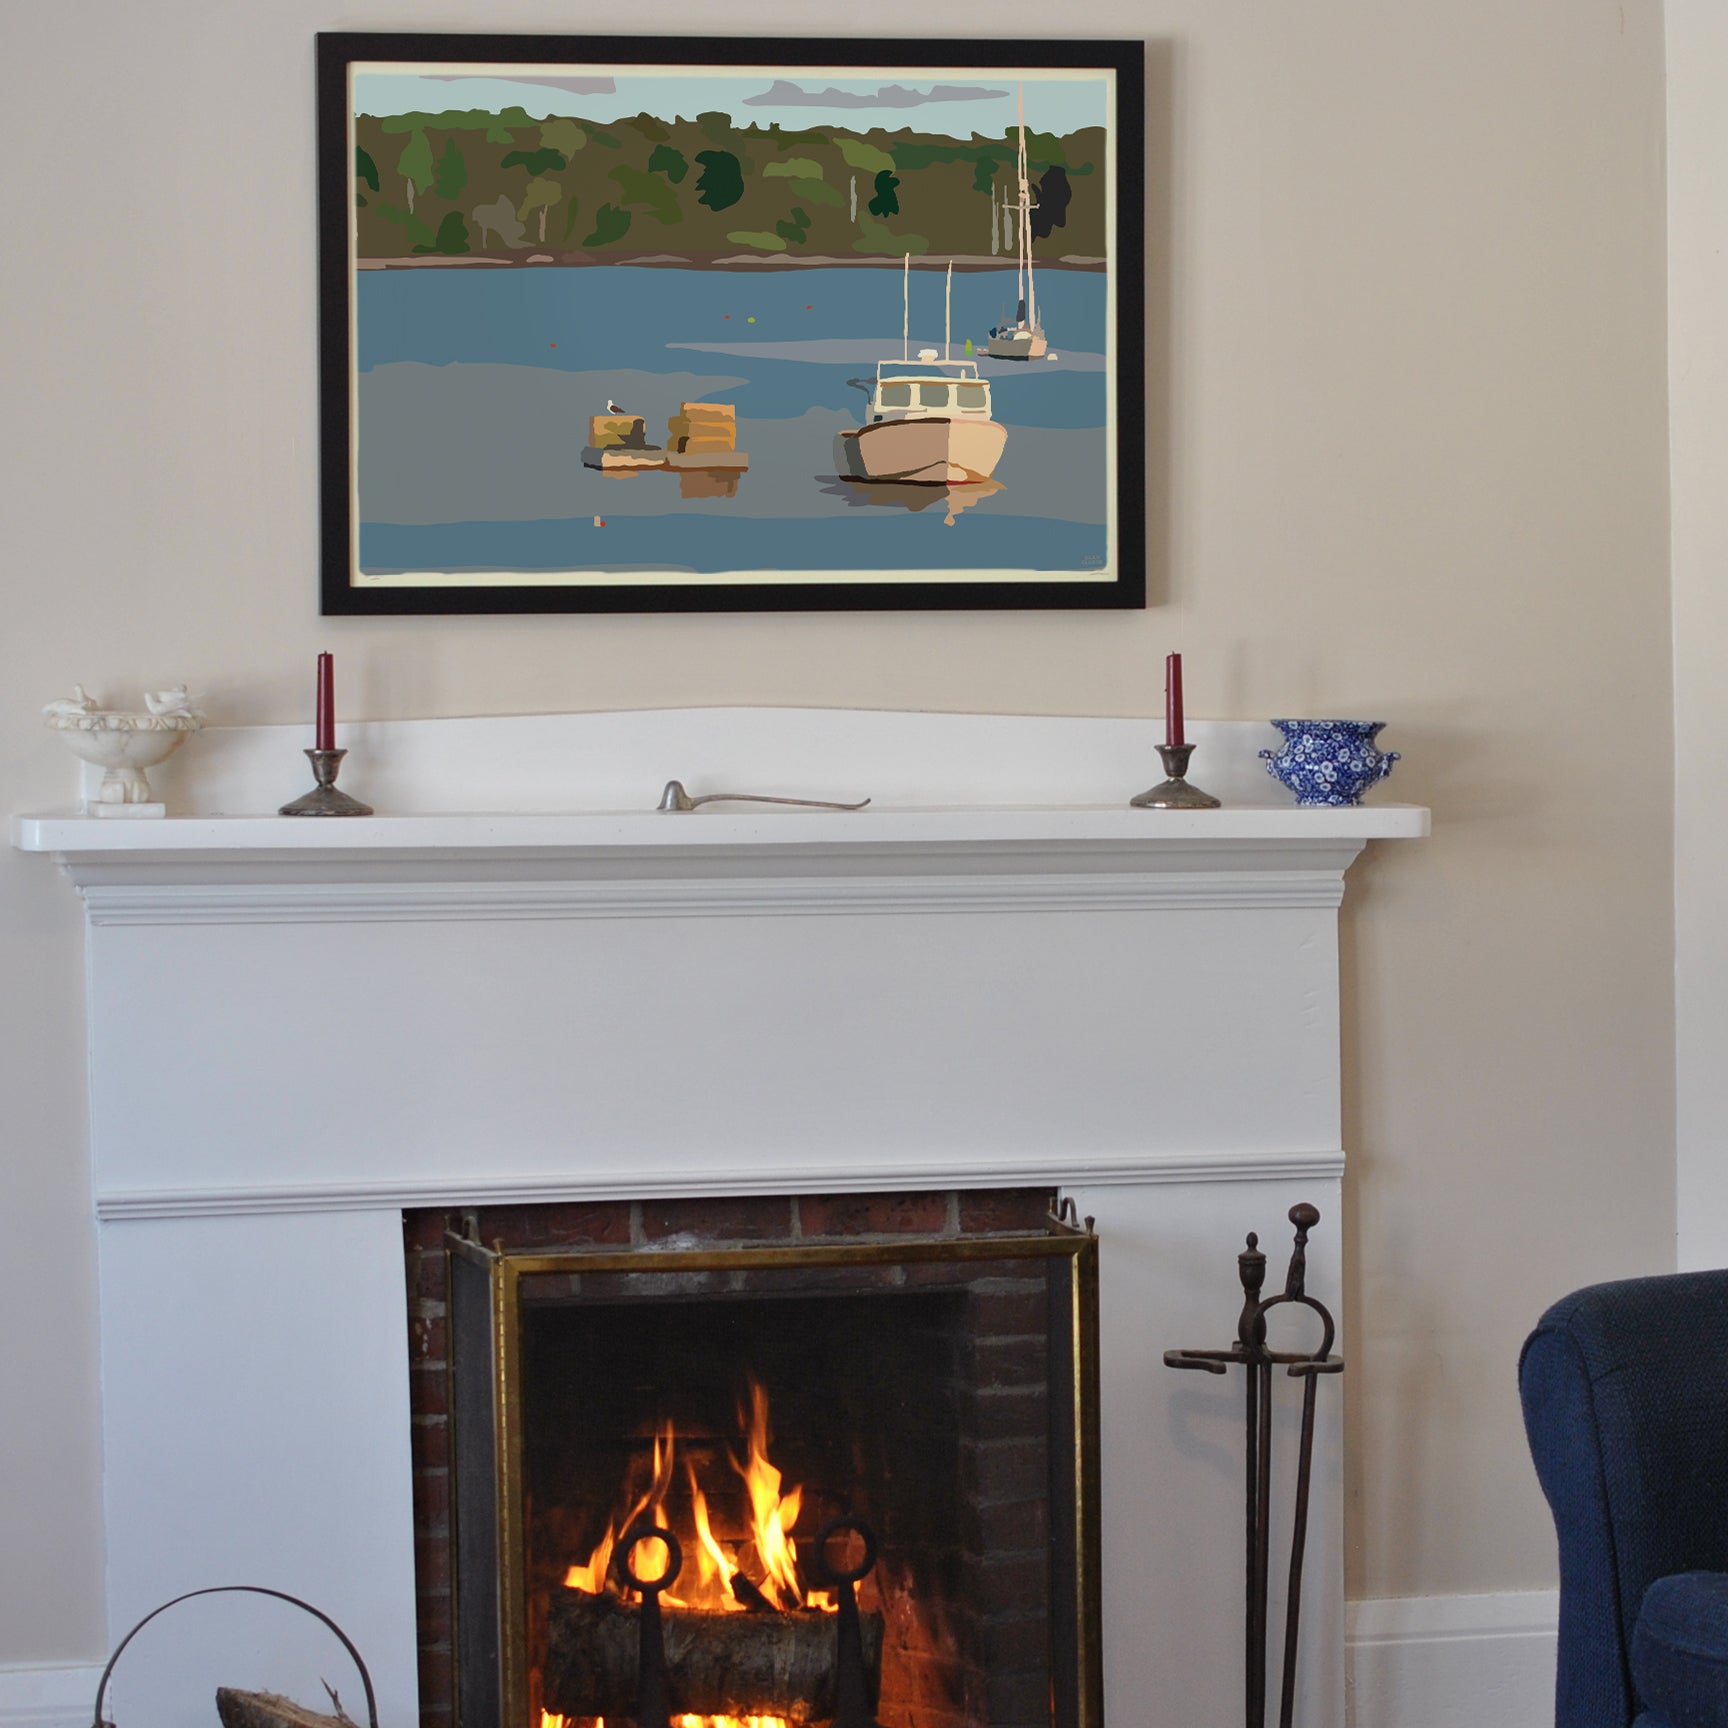 Lobster Boat in Round Pond Harbor Art Print 24" x 36" Horizontal Framed Wall Poster By Alan Claude - Maine